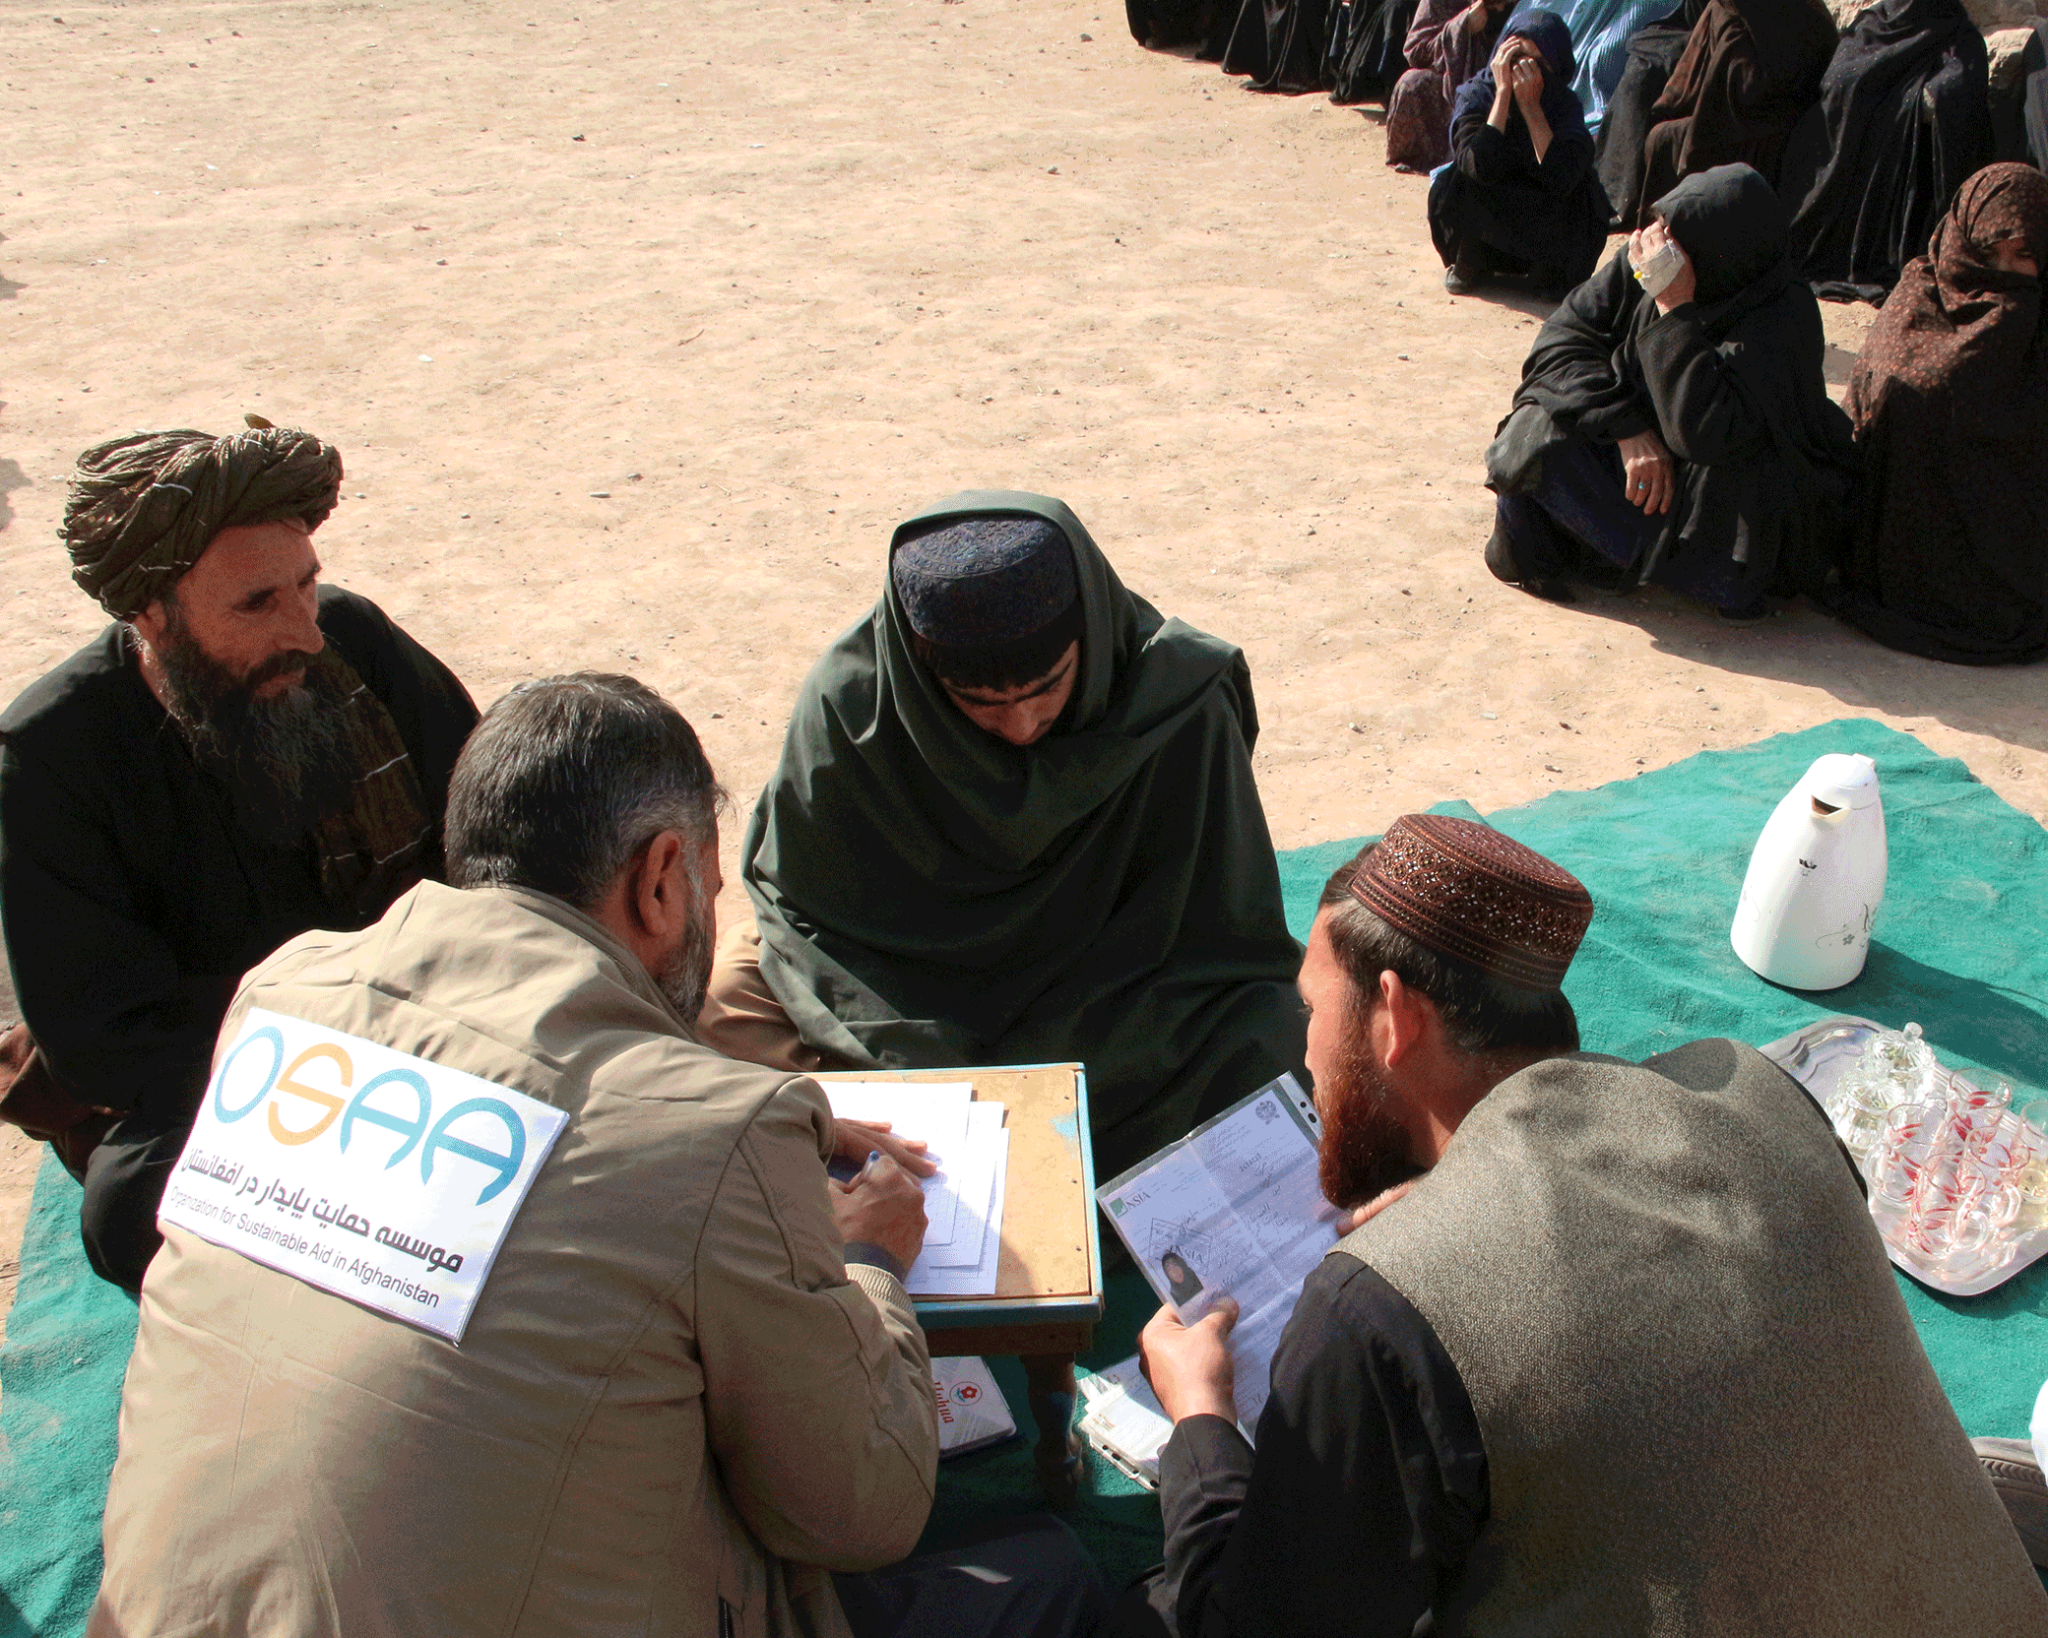 OSAA-distrobuted-donation-packages-to-volnerable-people-from-resent-Earthquake-in-Herat-Afghanistan-(66)